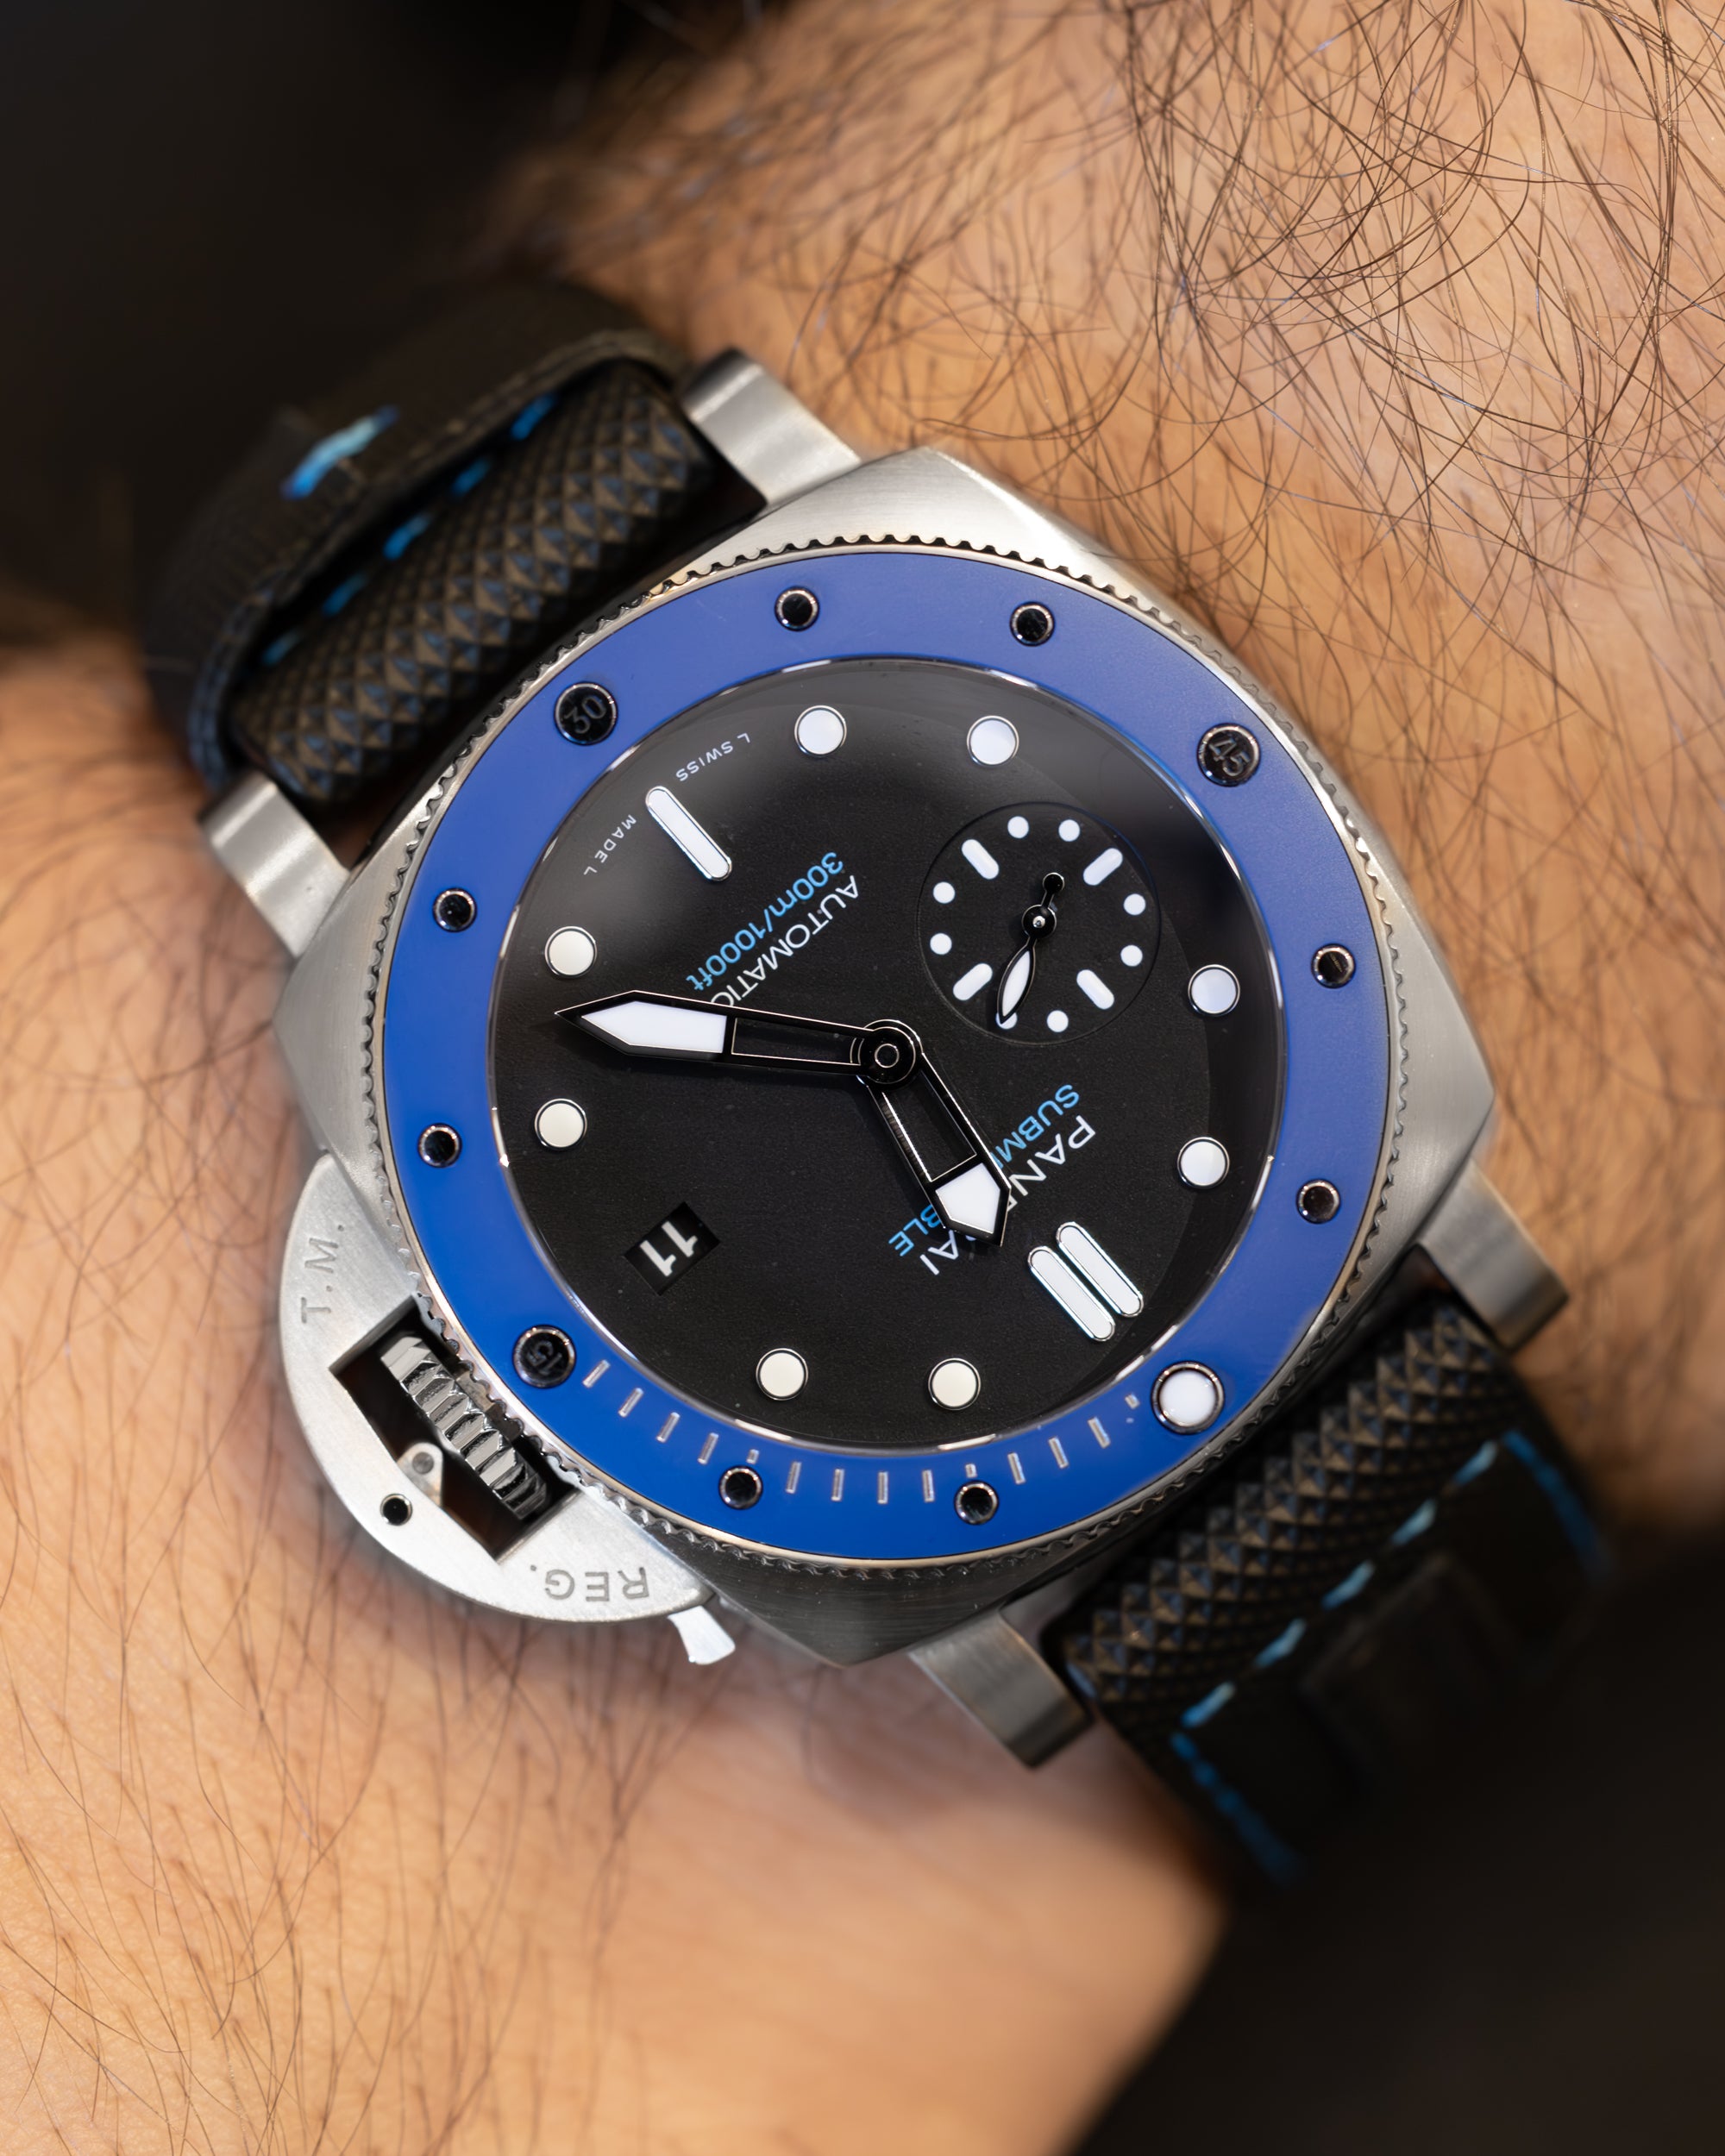 Submersible Azzurro Limited Edition Ref. PAM01209